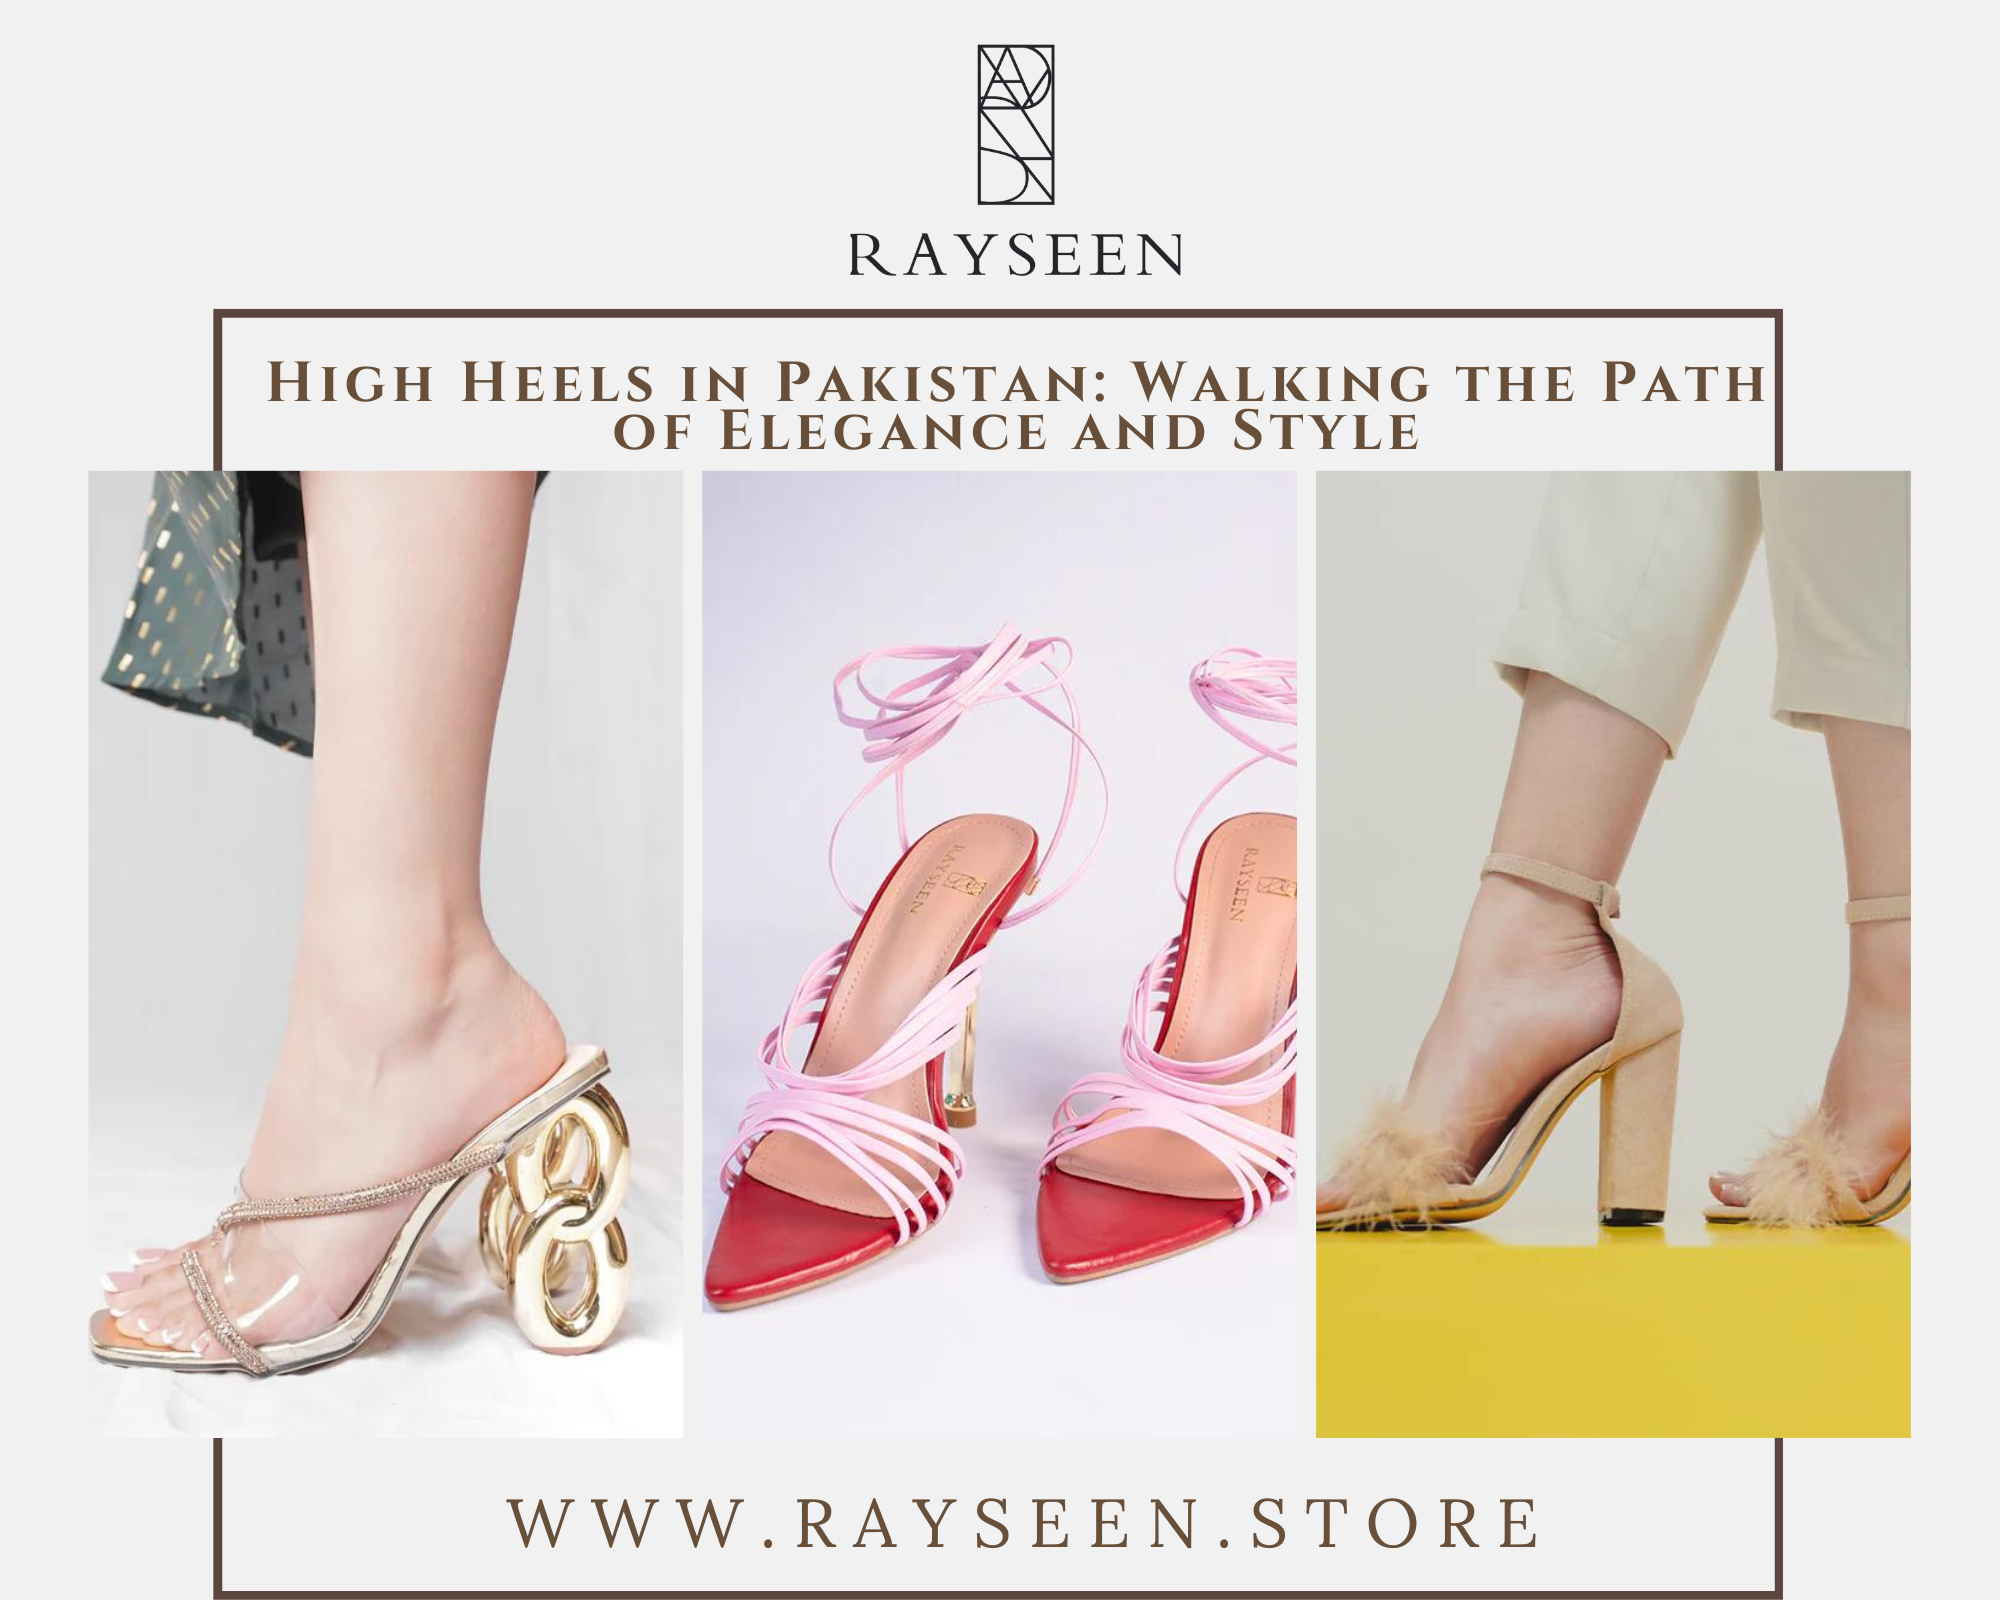 High Heels in Pakistan: Walking the Path of Elegance and Style